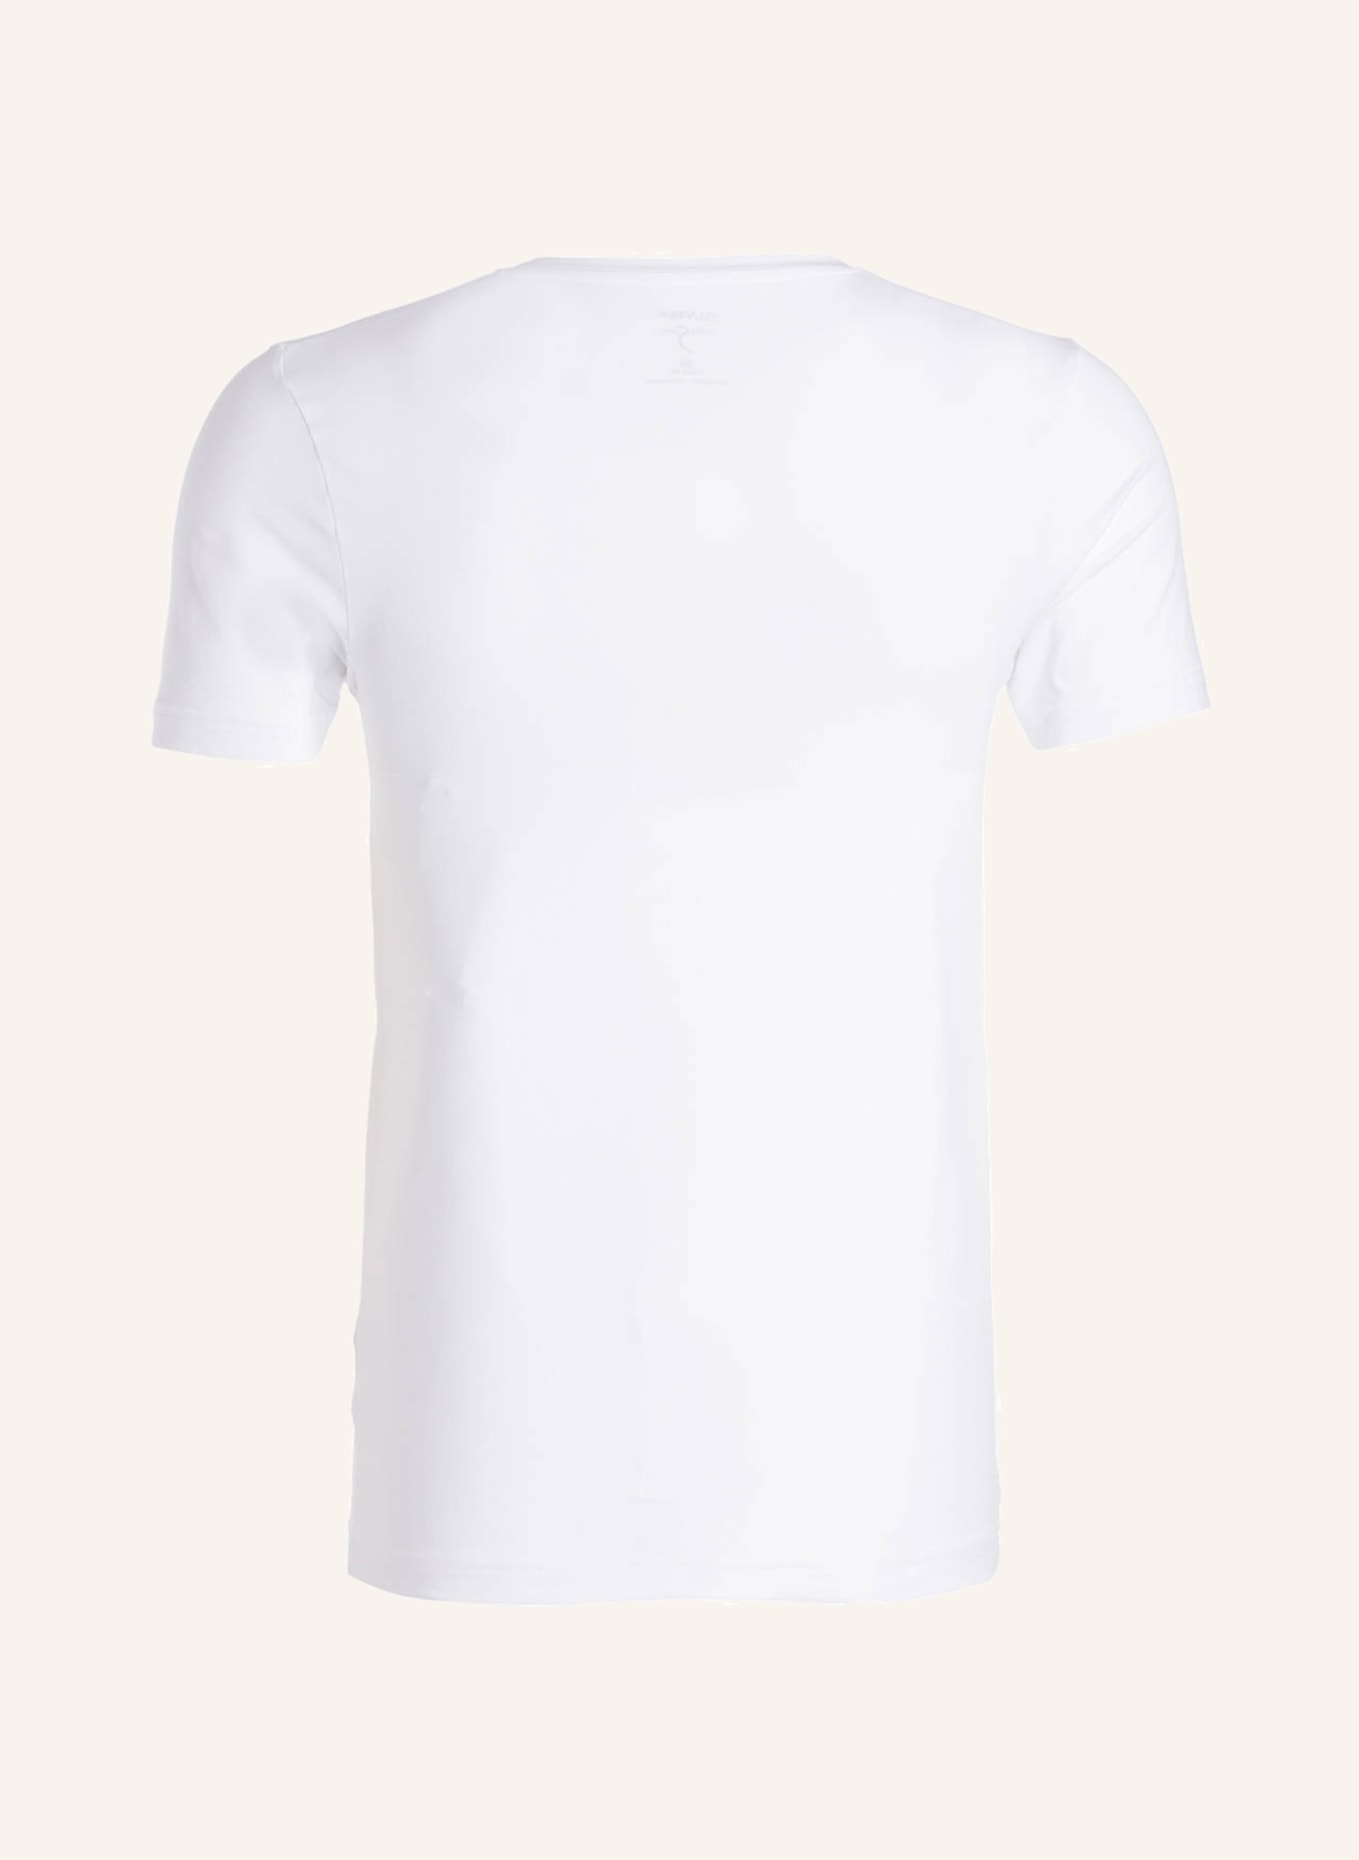 OLYMP T-Shirt Level Five body fit, Farbe: WEISS (Bild 2)